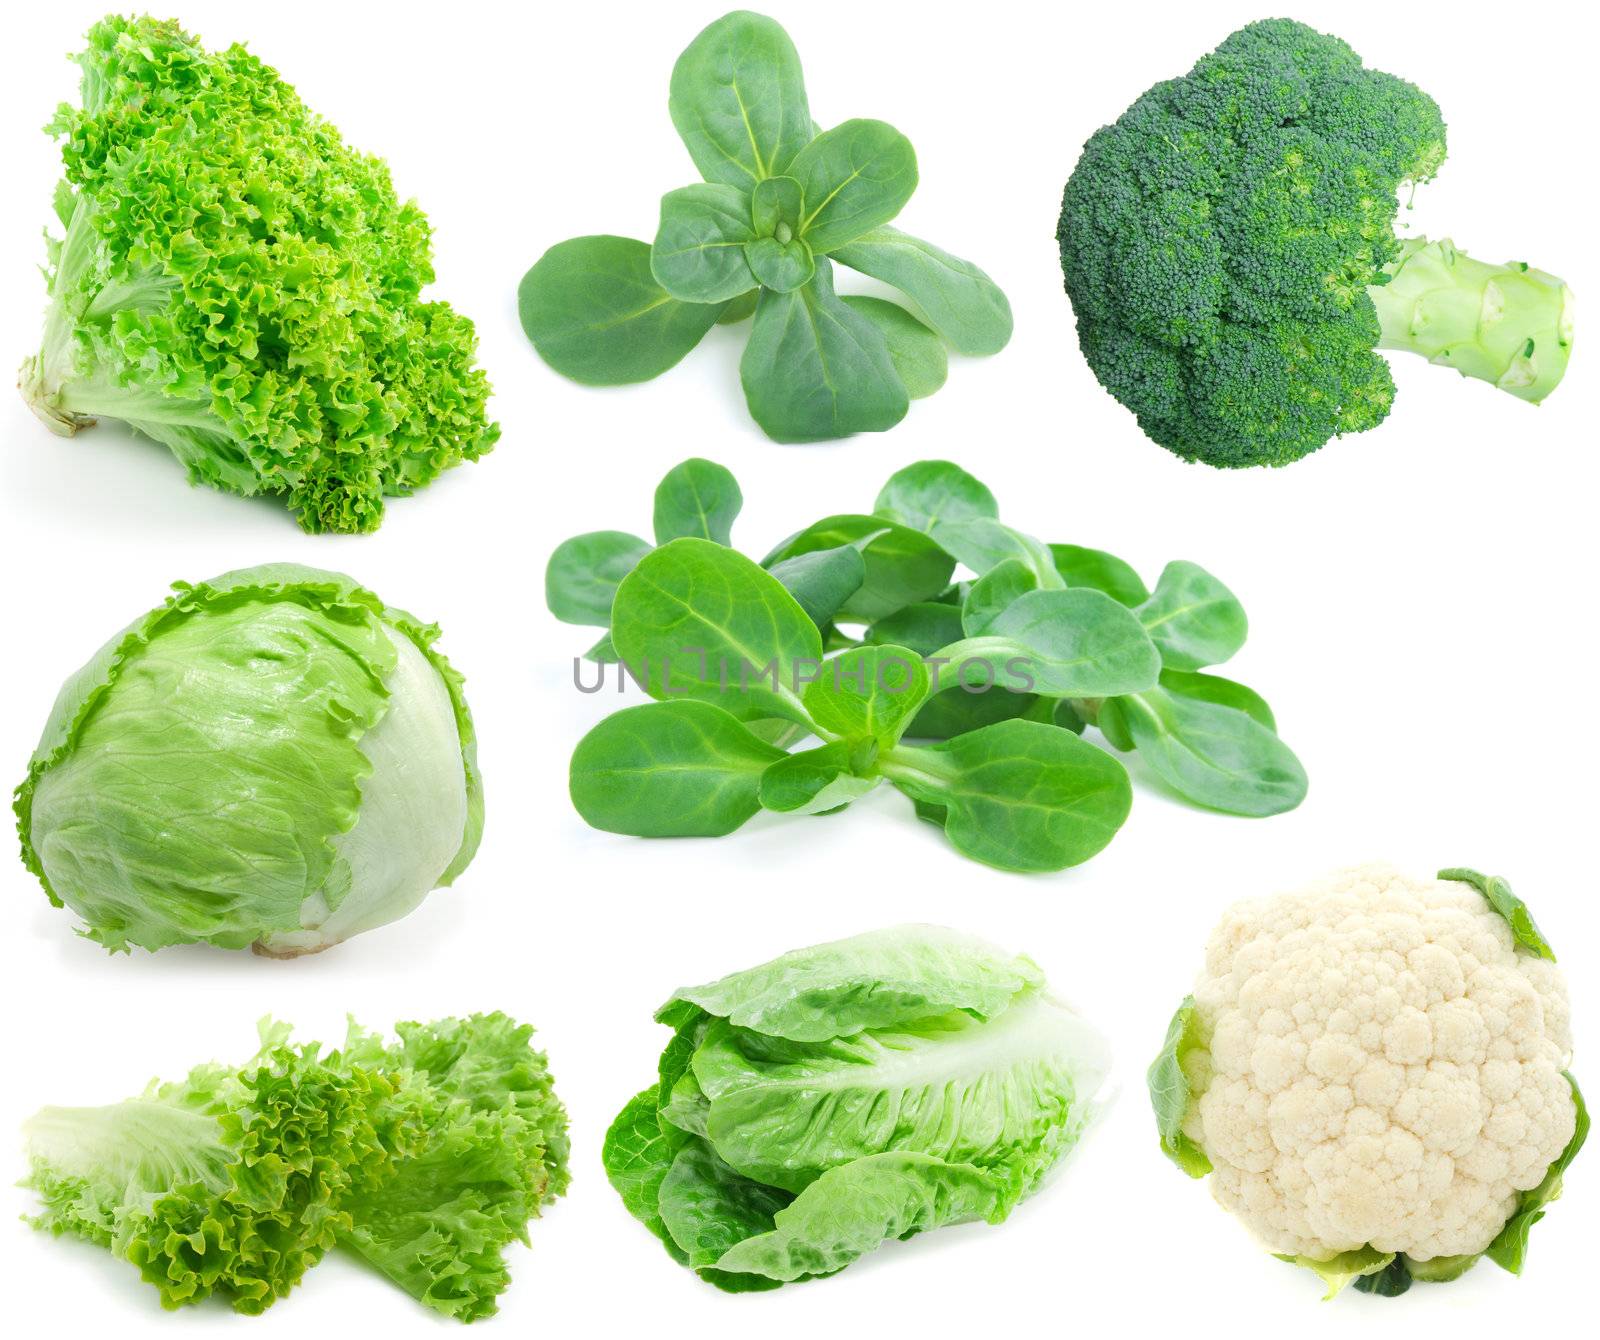 cabbage and green vegetable collection isolated on white background  by motorolka